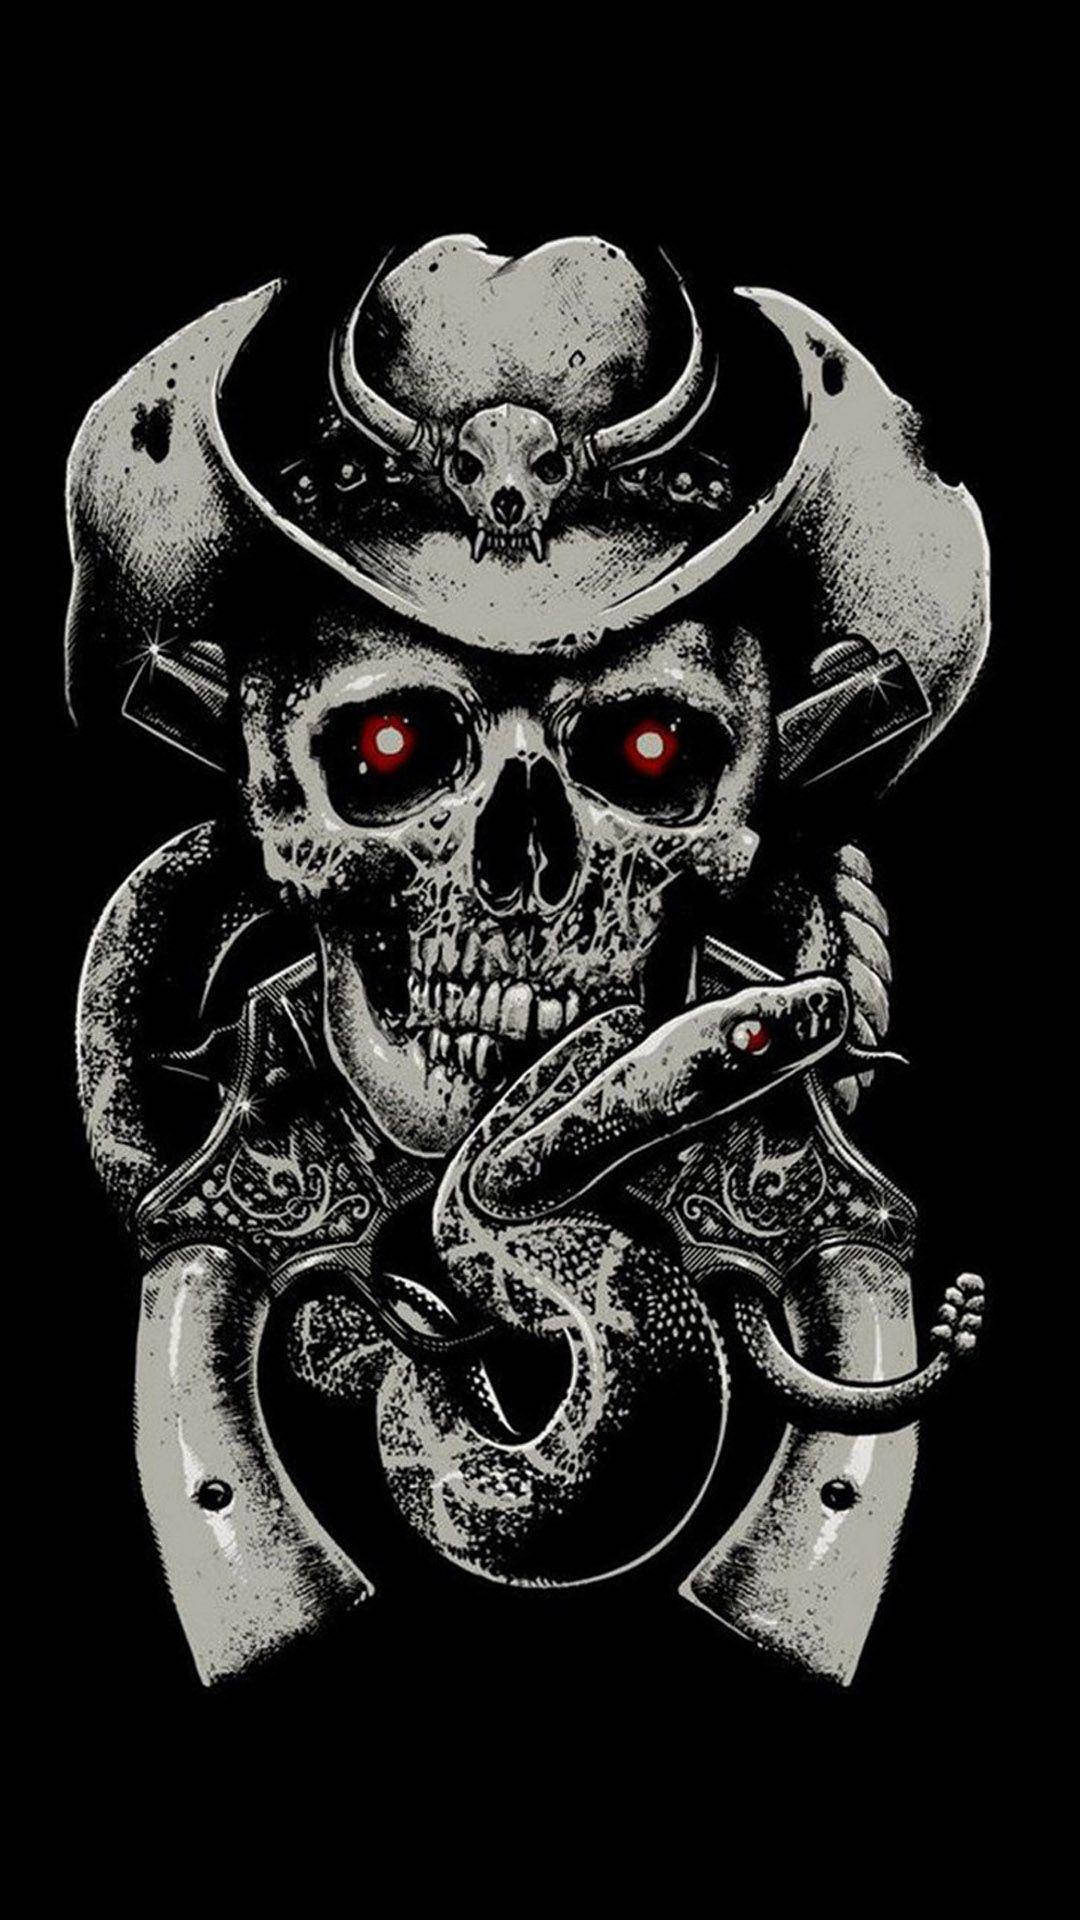 A Skull With A Snake On His Head Wallpaper